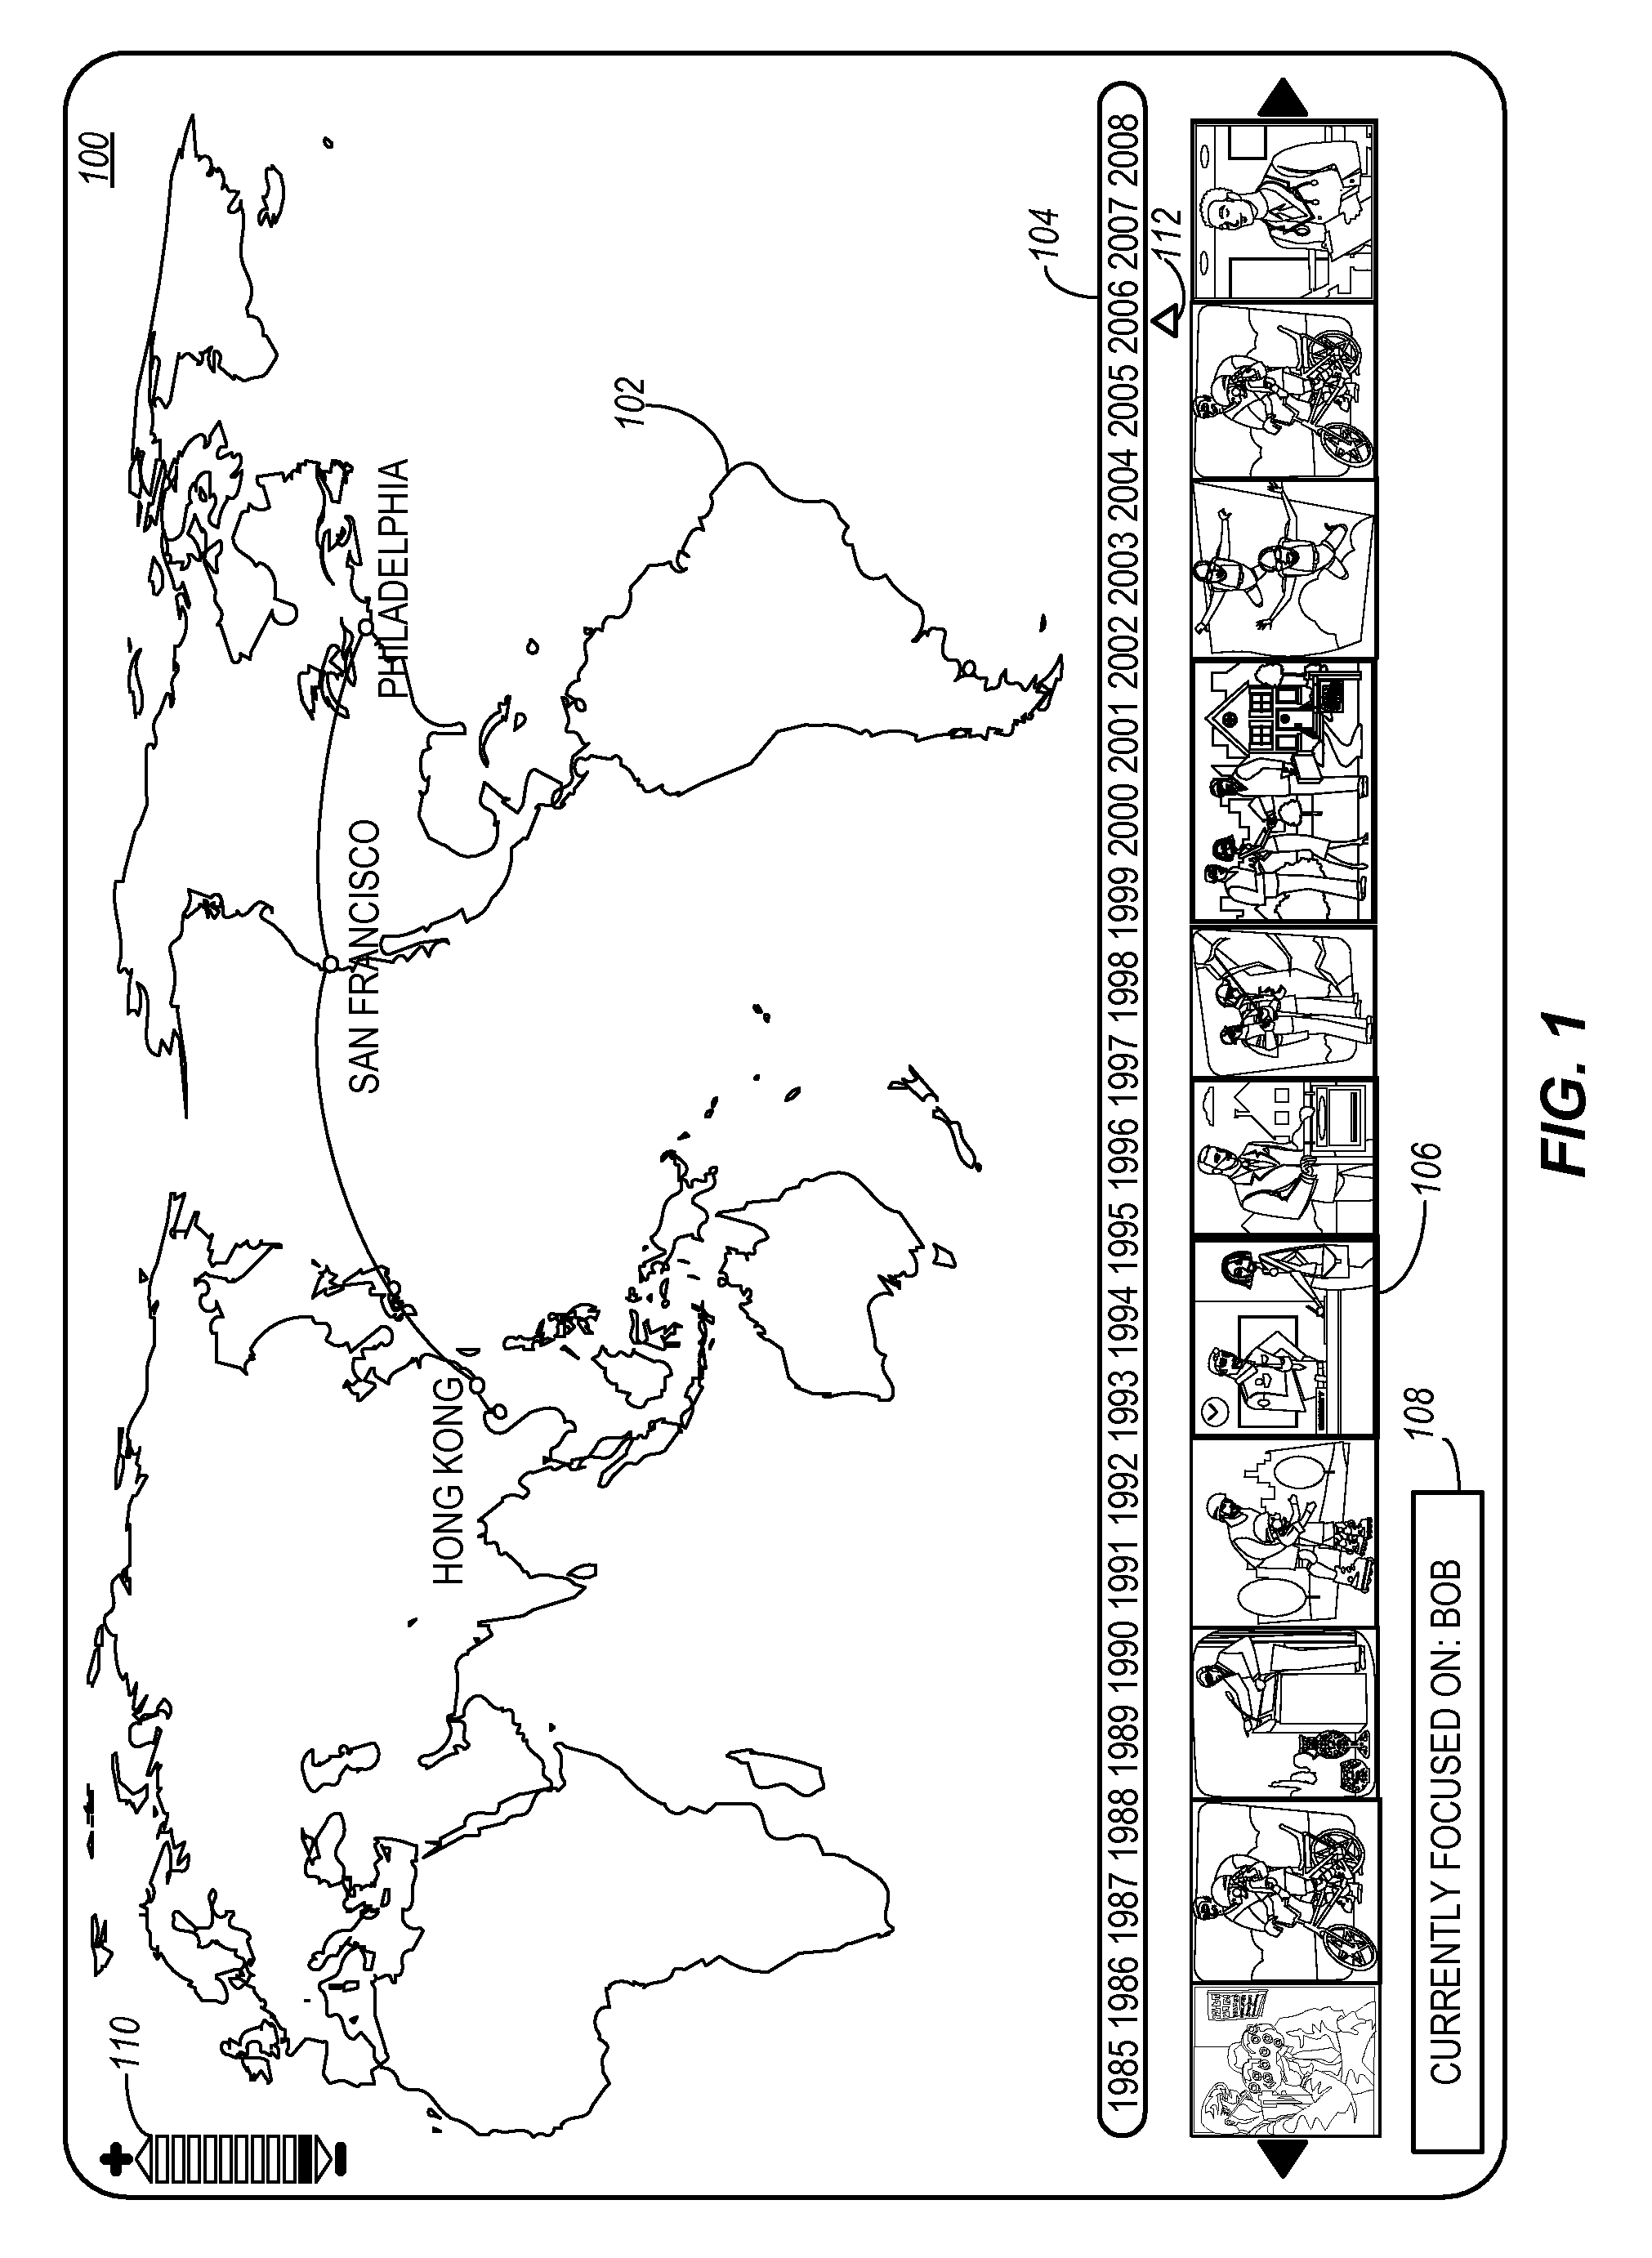 Method and system for traversing digital records with multiple dimensional attributes